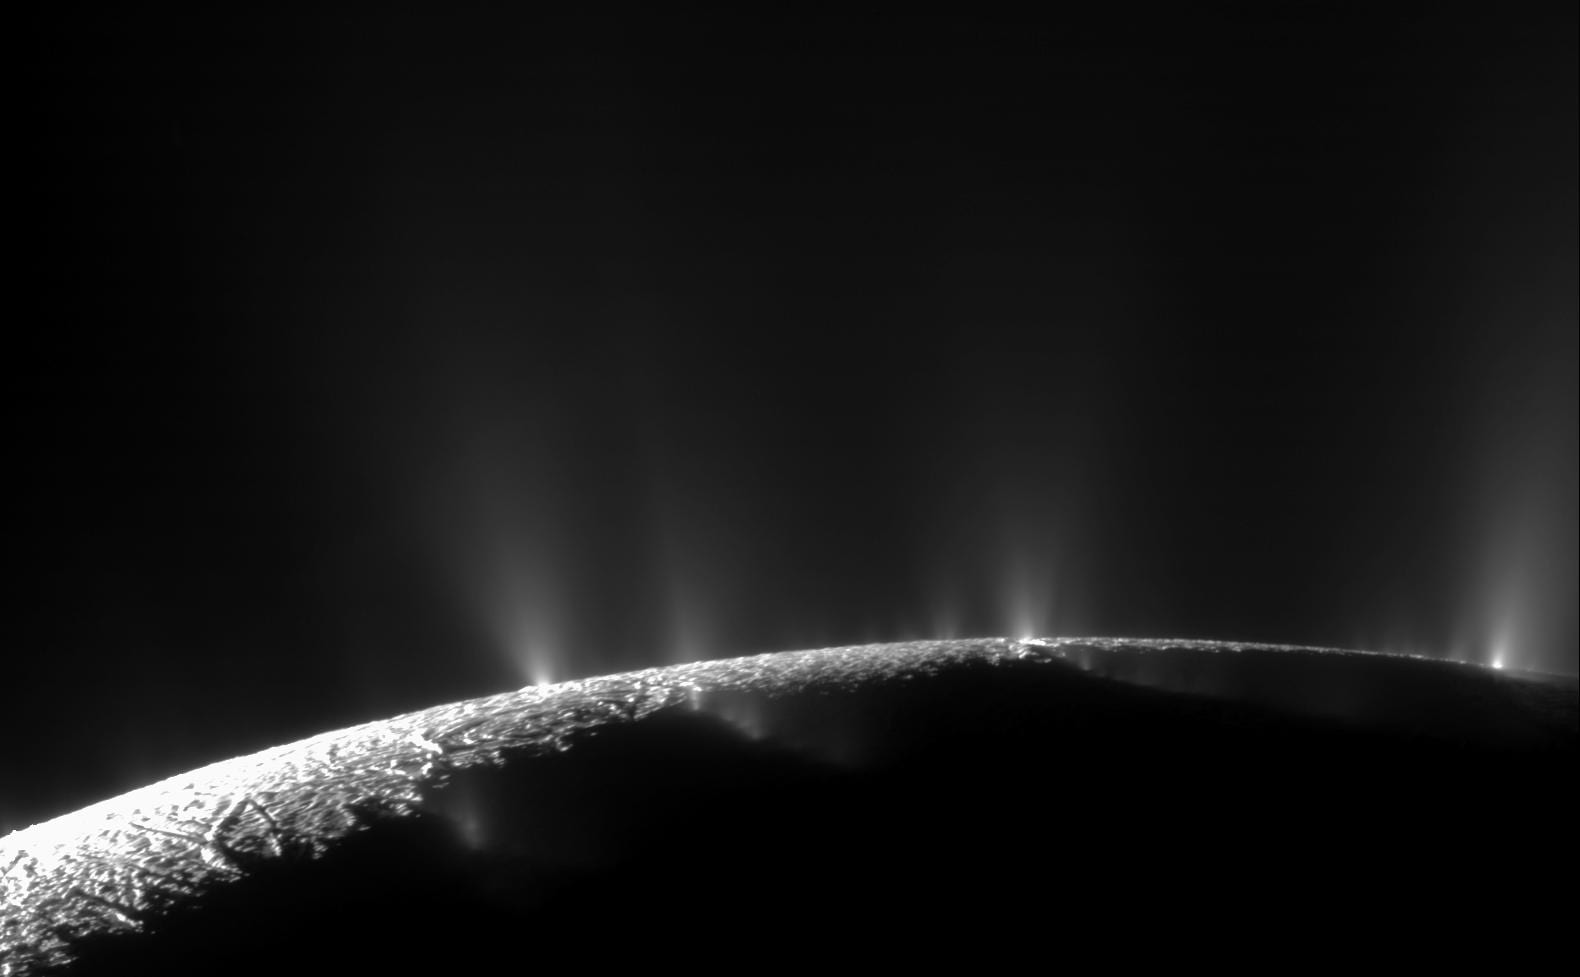 A small section of a darkly lit moon with bright jets of water shooting out from the surface against the blackness of space.